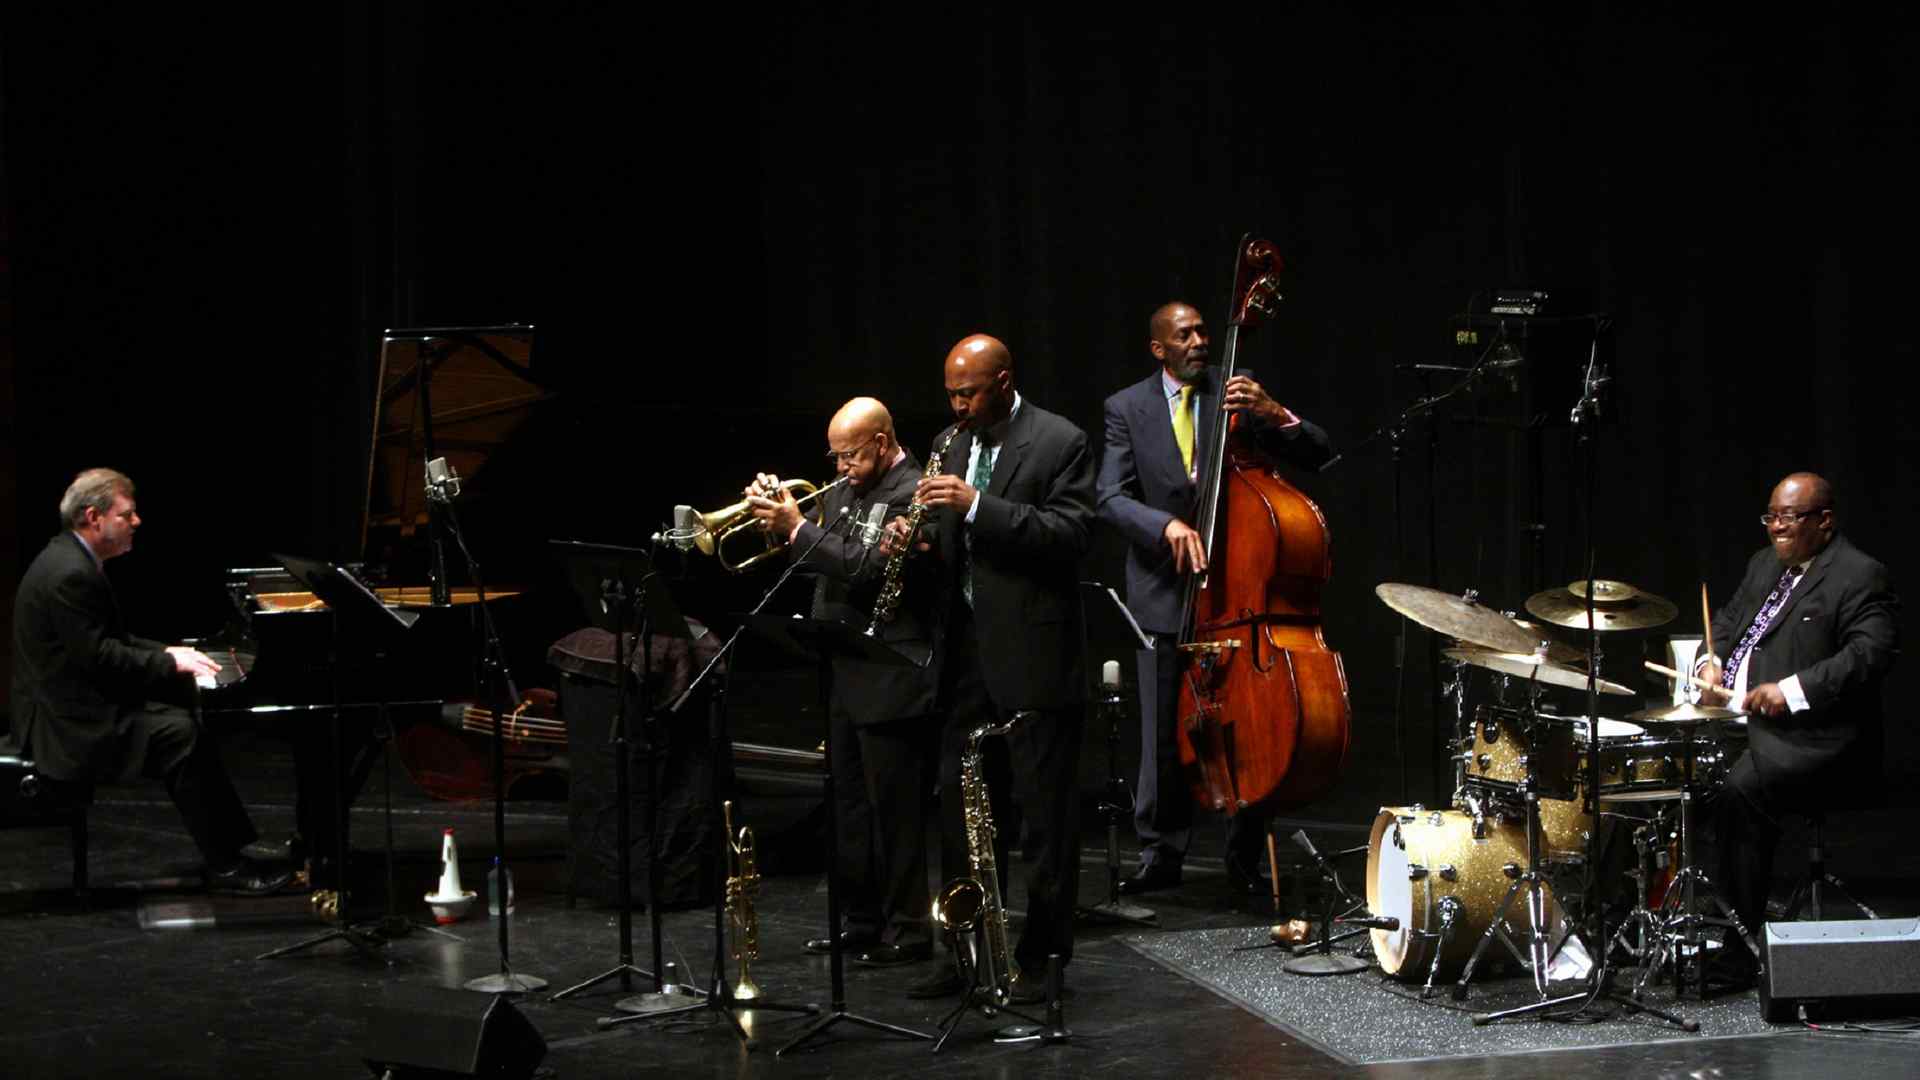 An ensemble of jazz musicians, including Frank Kimbrough at the keyboard, performing